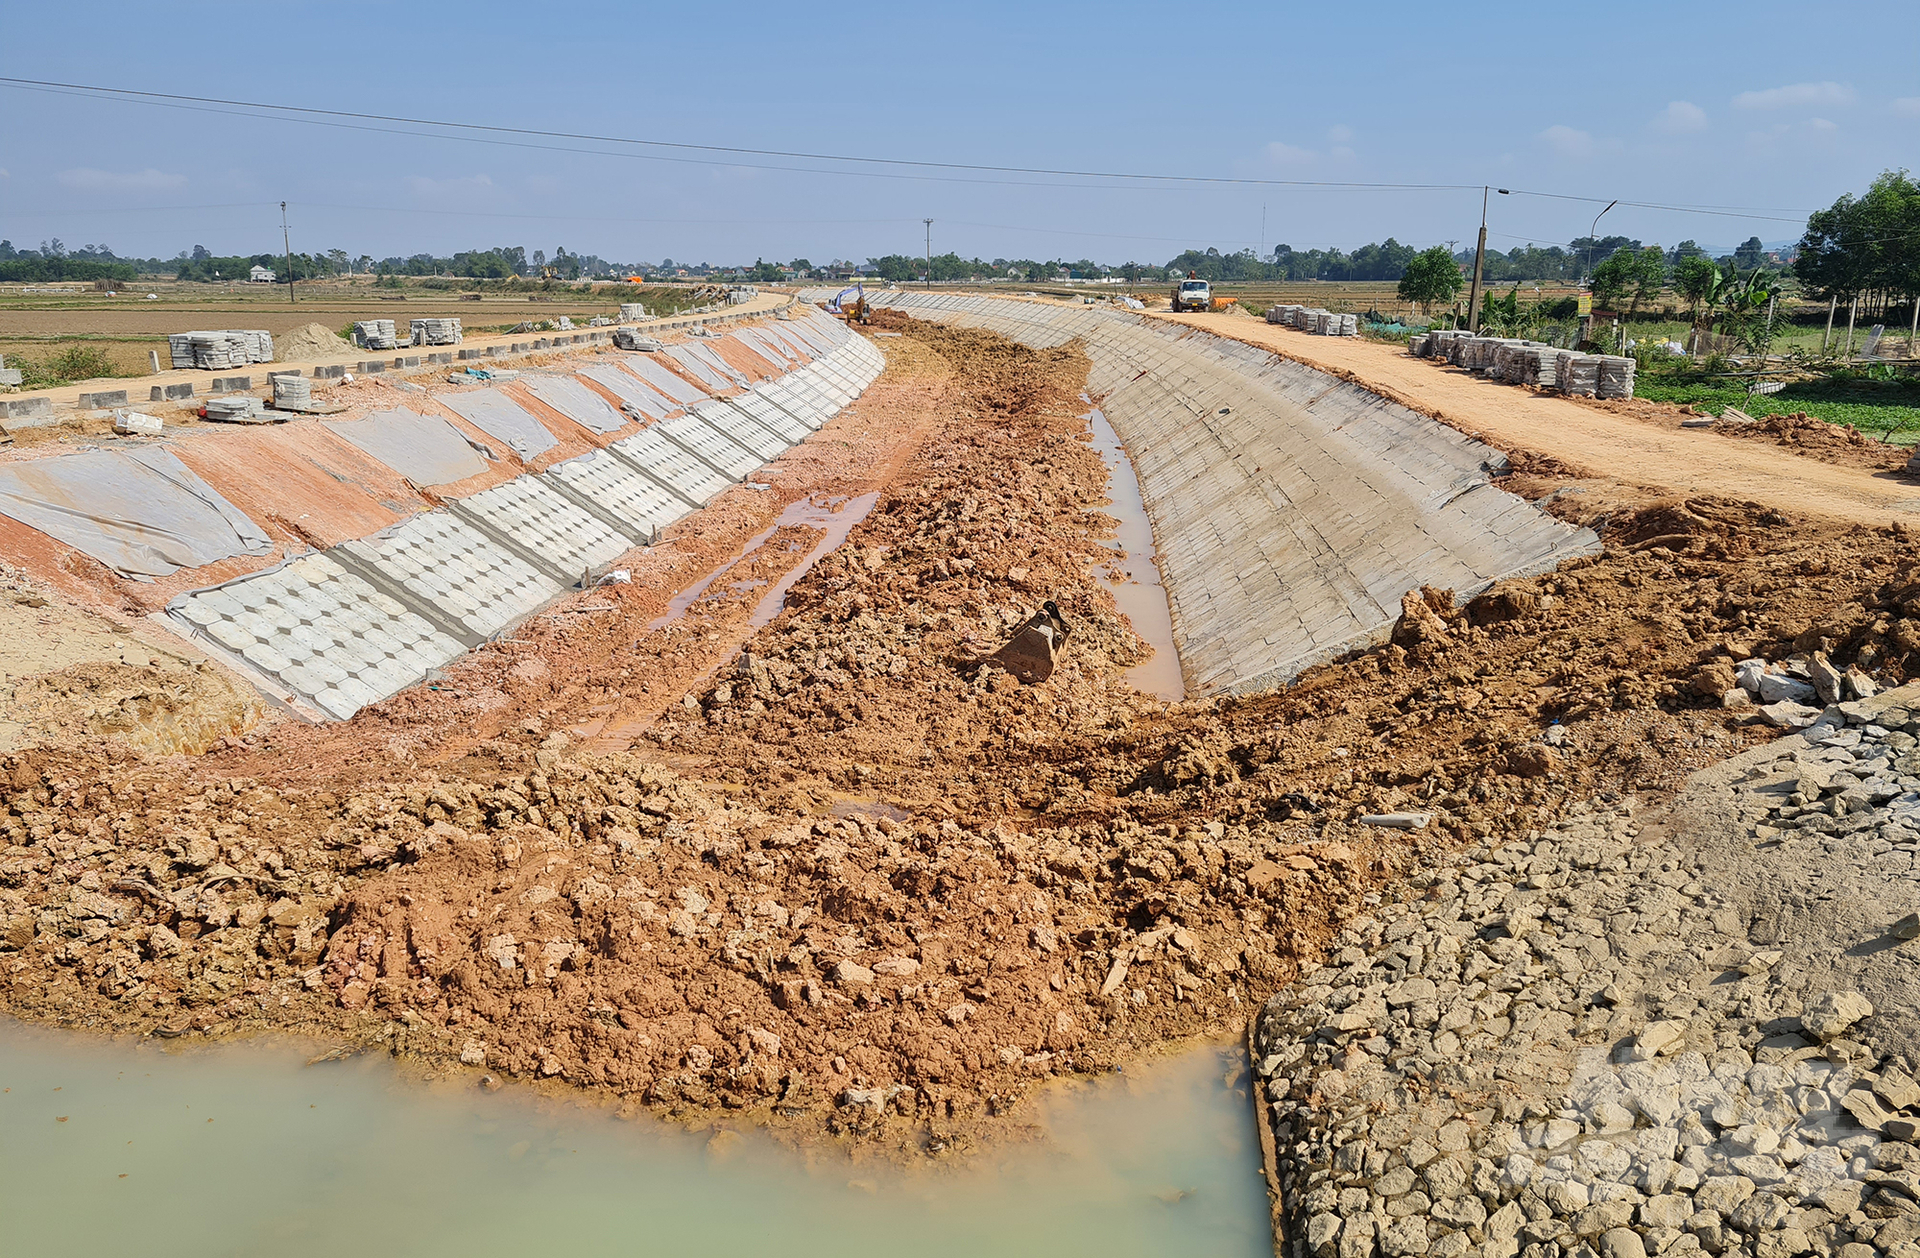 The lack of funds to construct, upgrade, and maintain the dyke system is a major challenge in many provinces and cities. Photo: Viet Khanh.